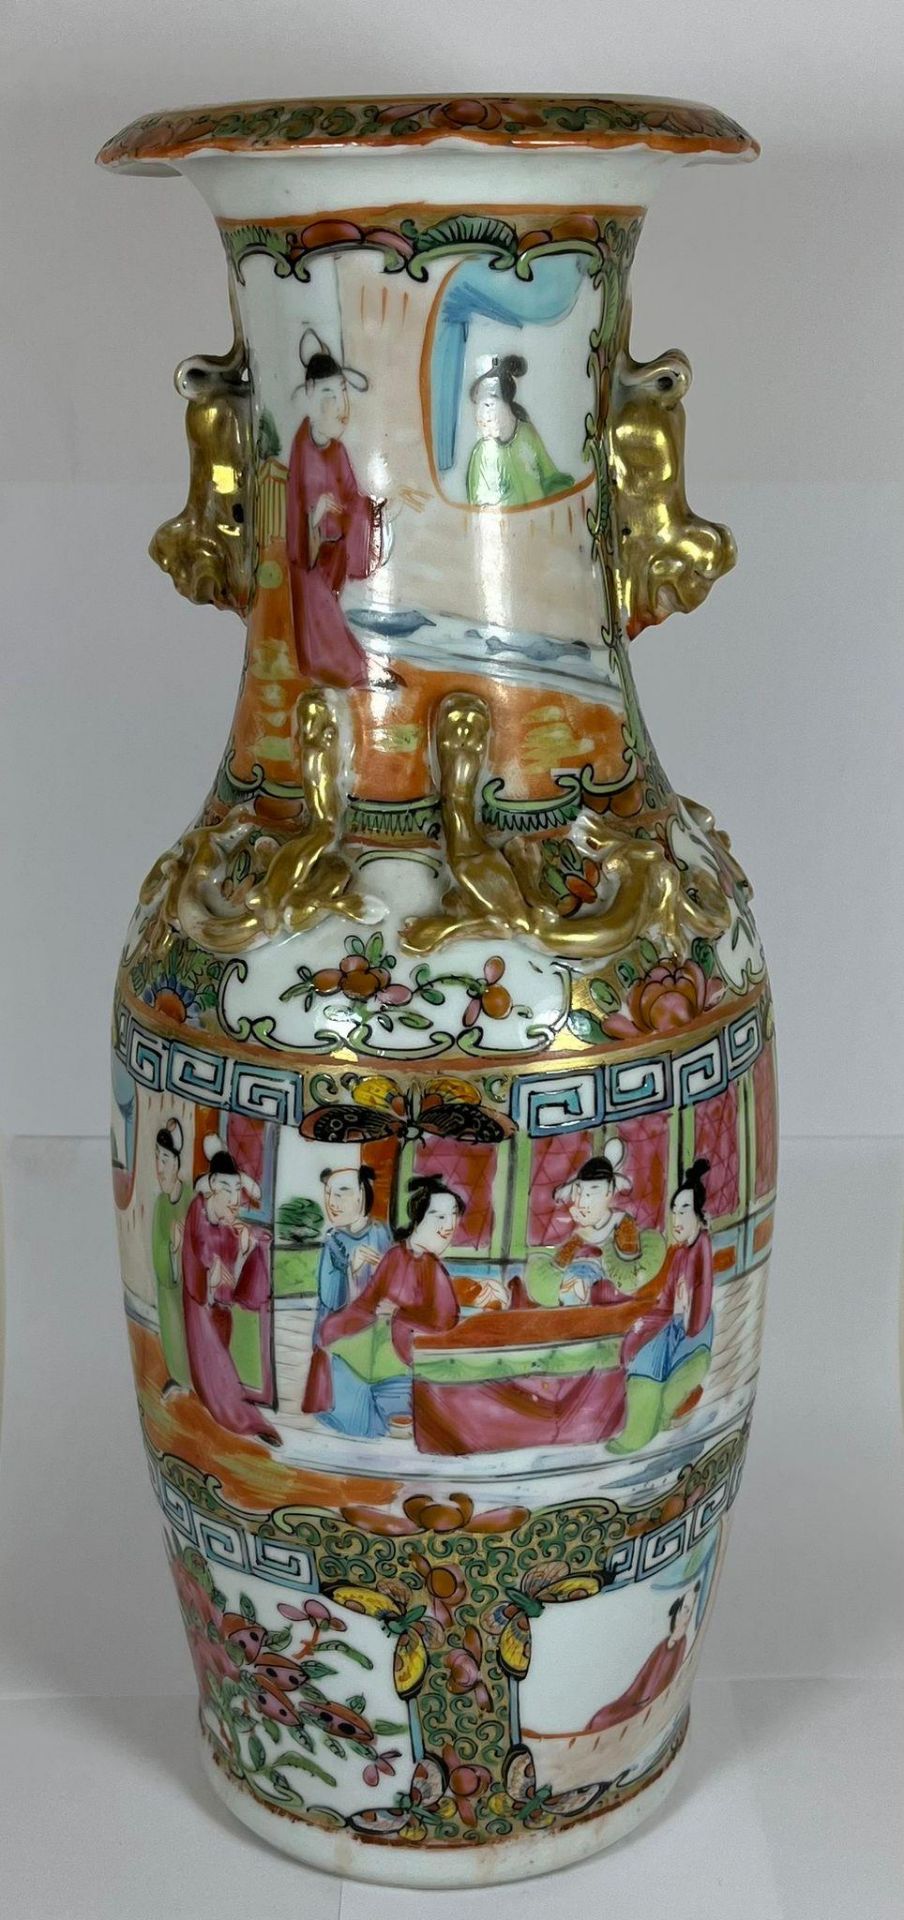 A LATE 19TH CENTURY CHINESE CANTON FAMILLE ROSE WITH FIGURAL DESIGN FRONT PANEL AND BIRD AND